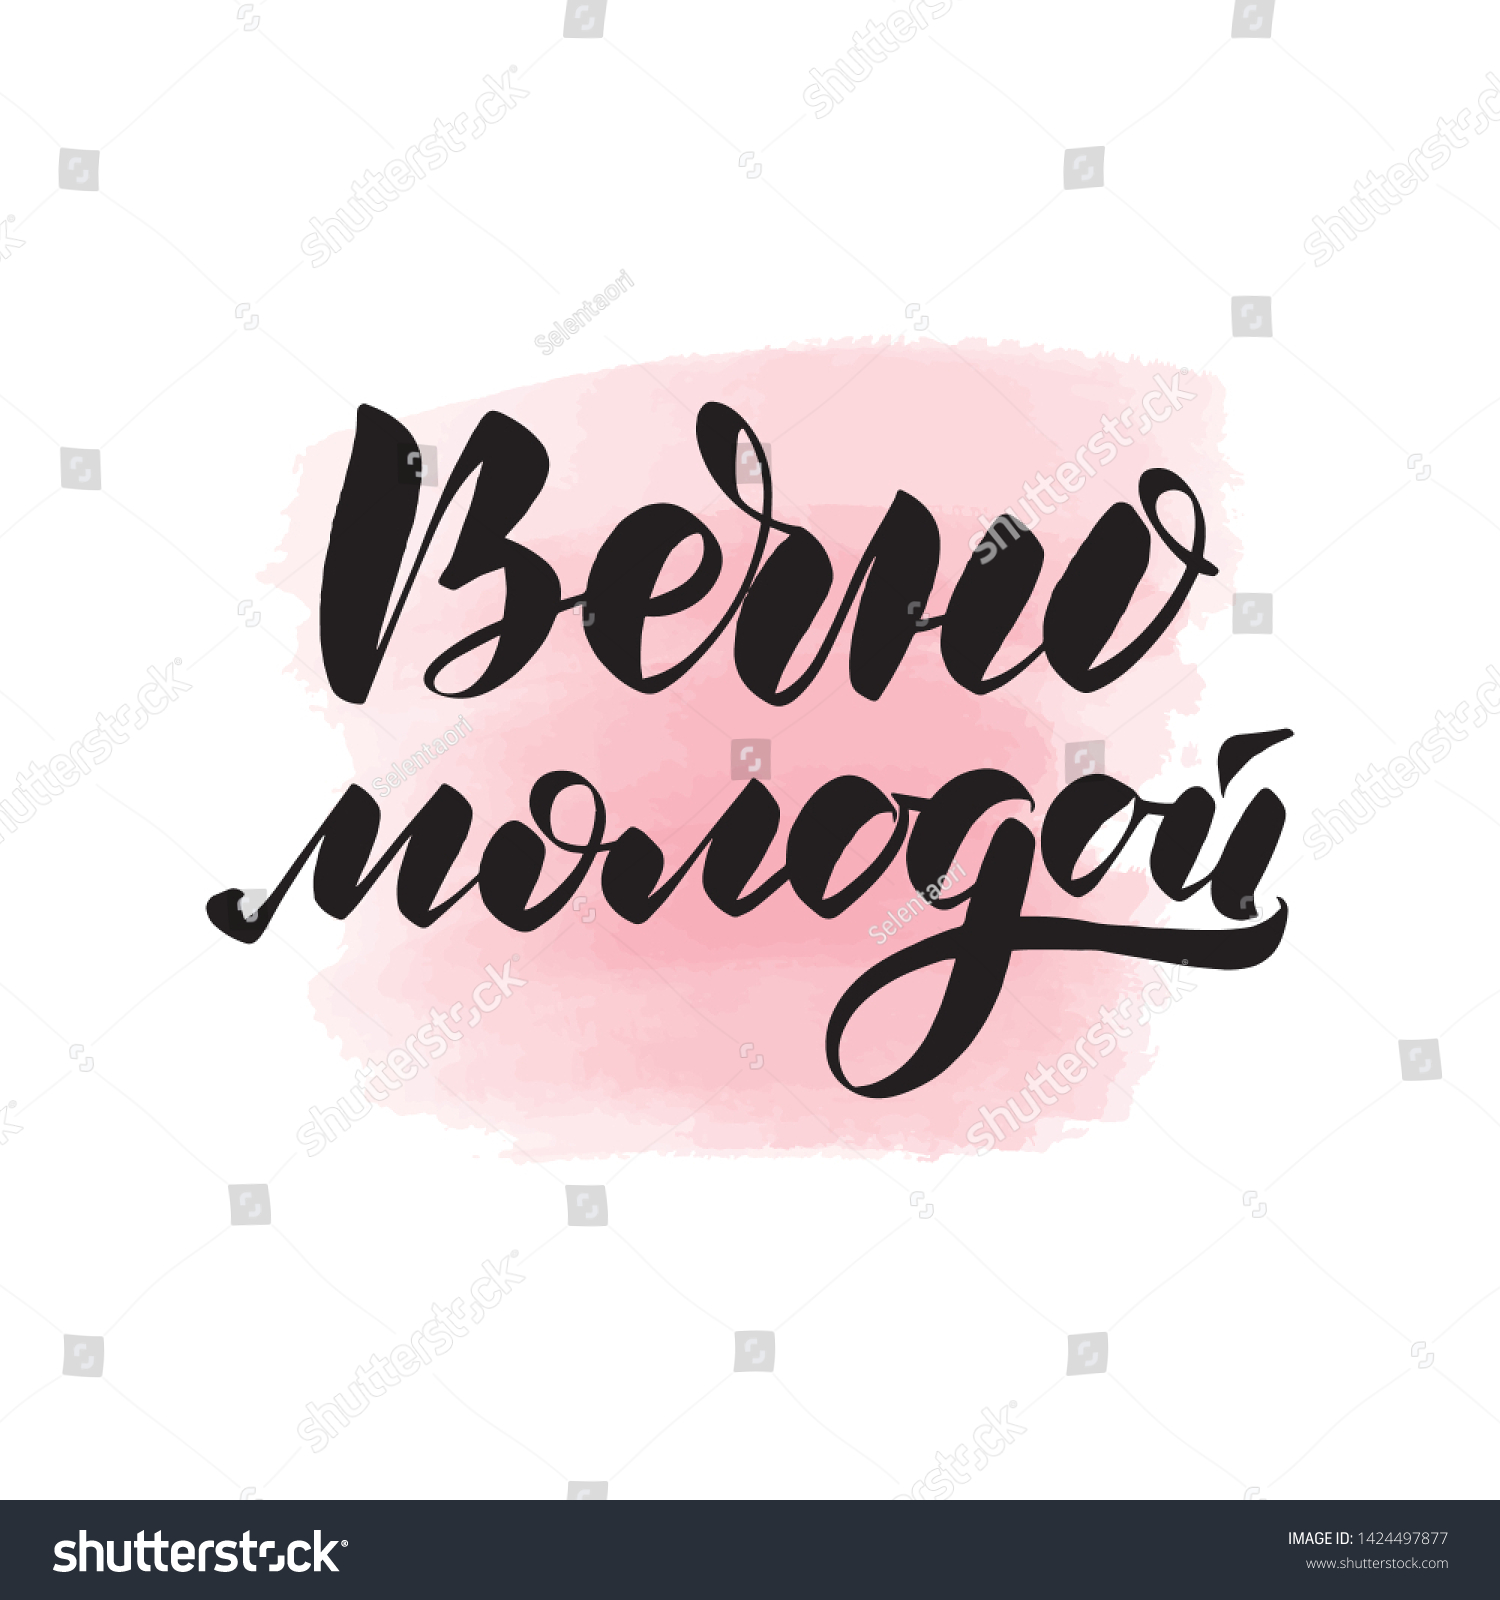 Handwritten brush lettering forever young in Russian. Vector calligraphy illustration with pink watercolor stain on background. Textile graphic, t-shirt print. #1424497877